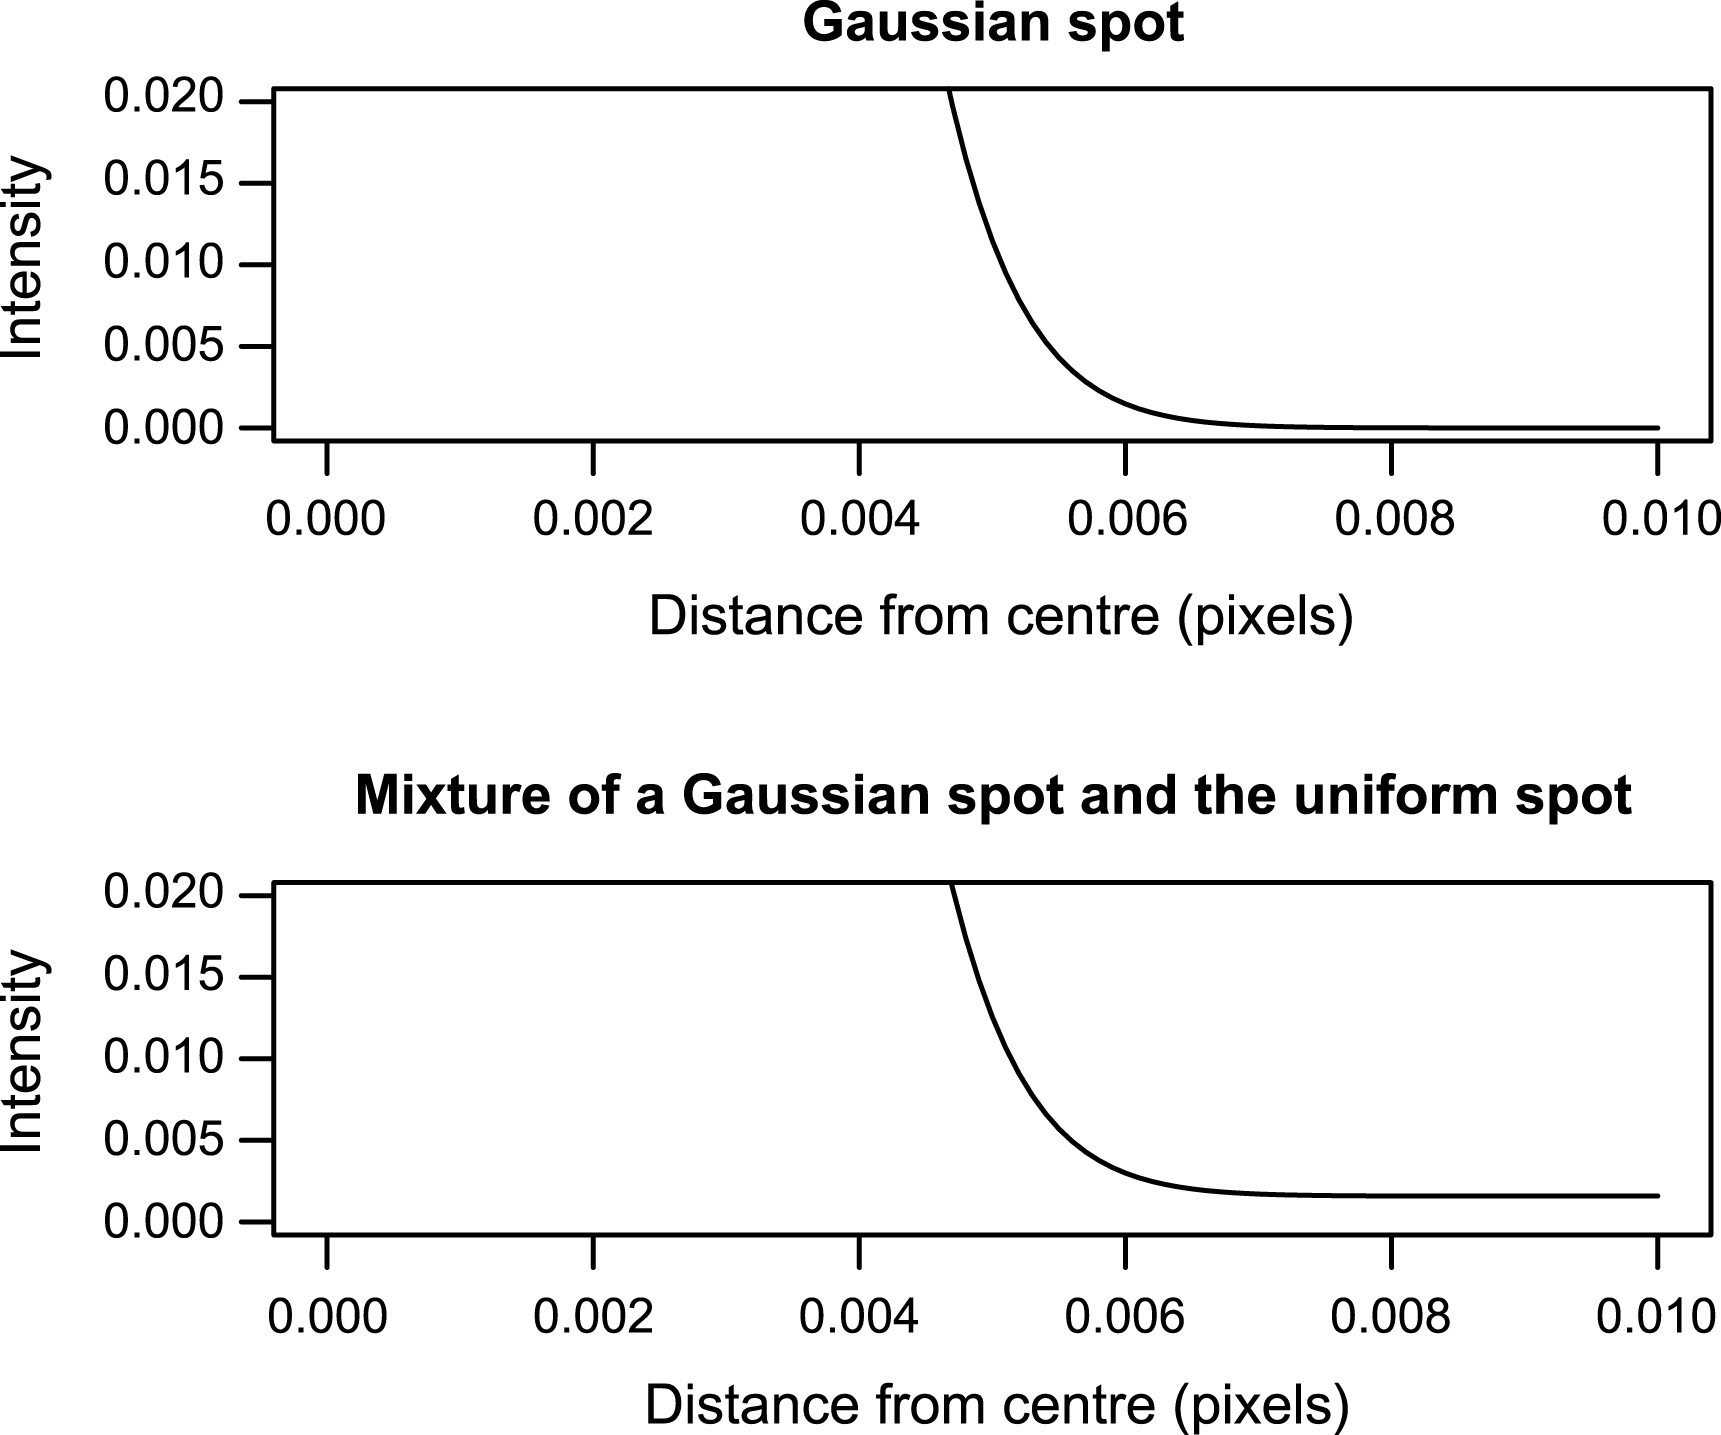 Tails from a single Gaussian spot (top) and the mixture of a Gaussian spot and the uniform spot (bottom). The heavier tails from the mixture can only be seen by magnifying the tail.